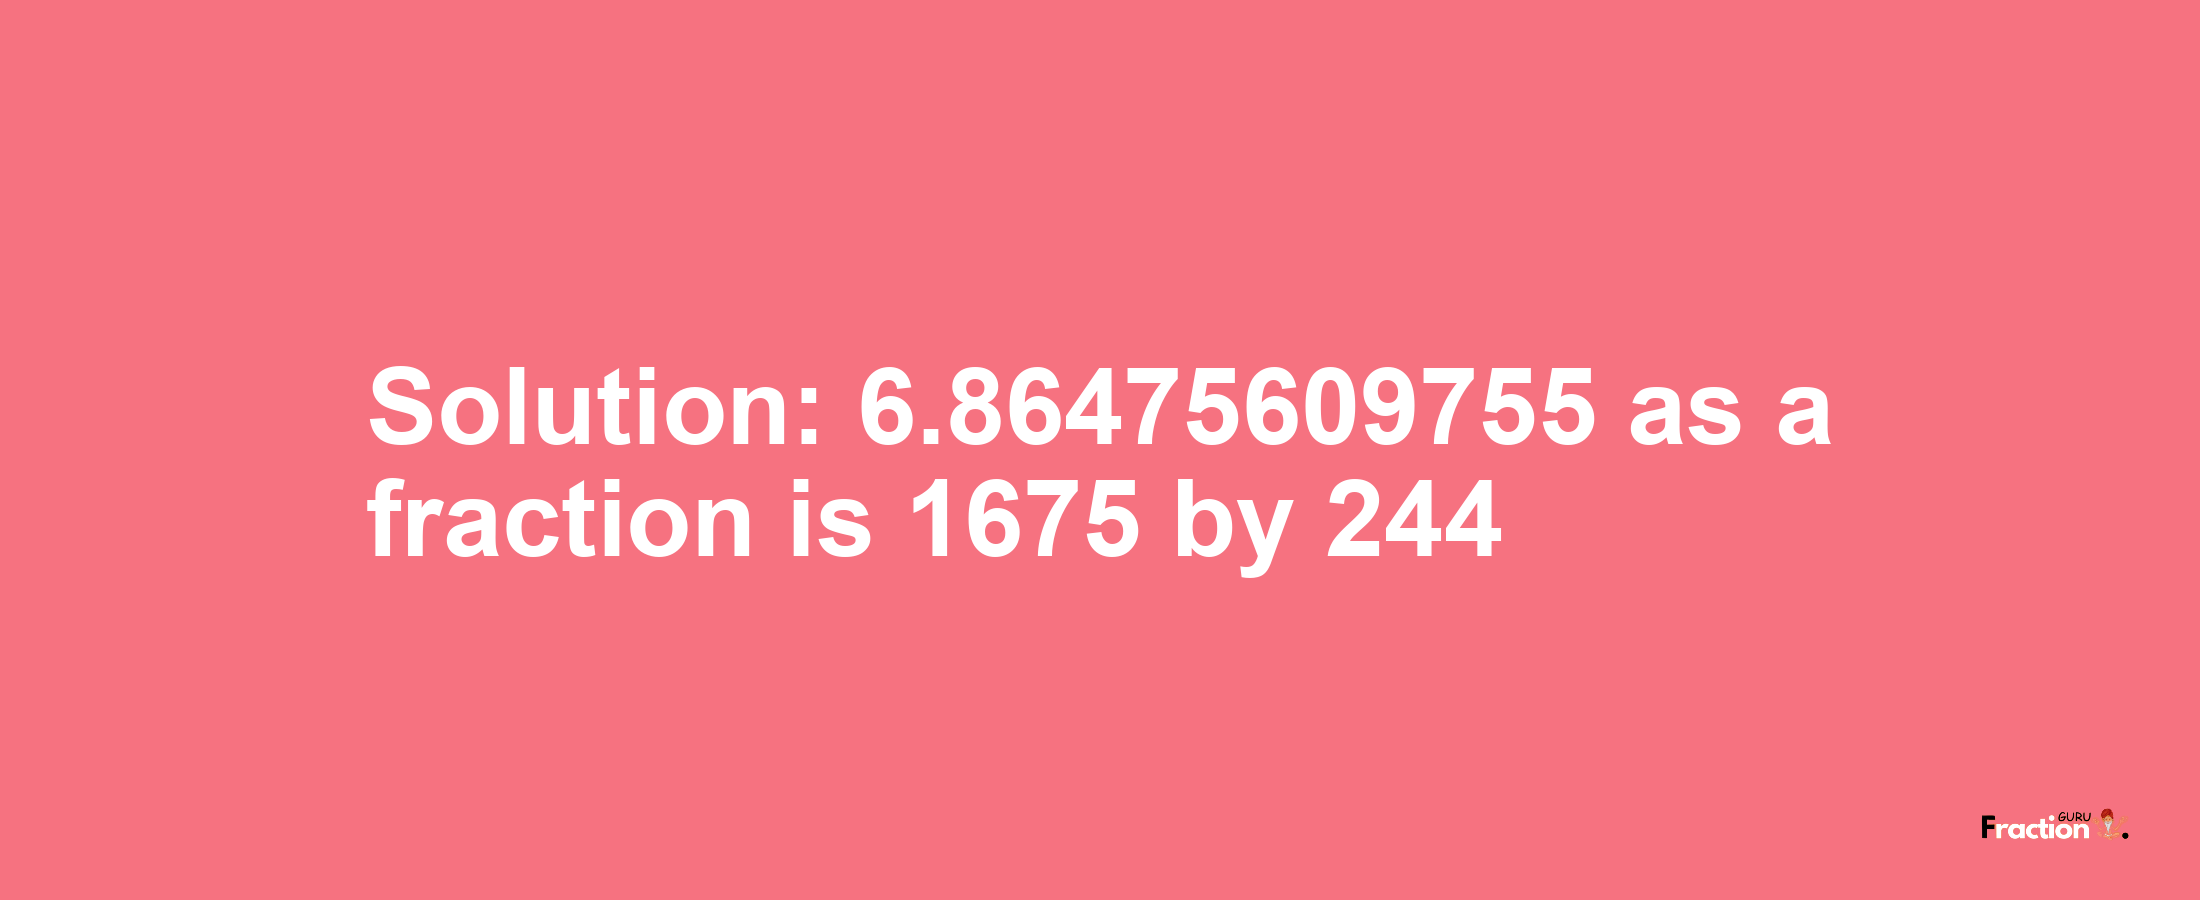 Solution:6.86475609755 as a fraction is 1675/244